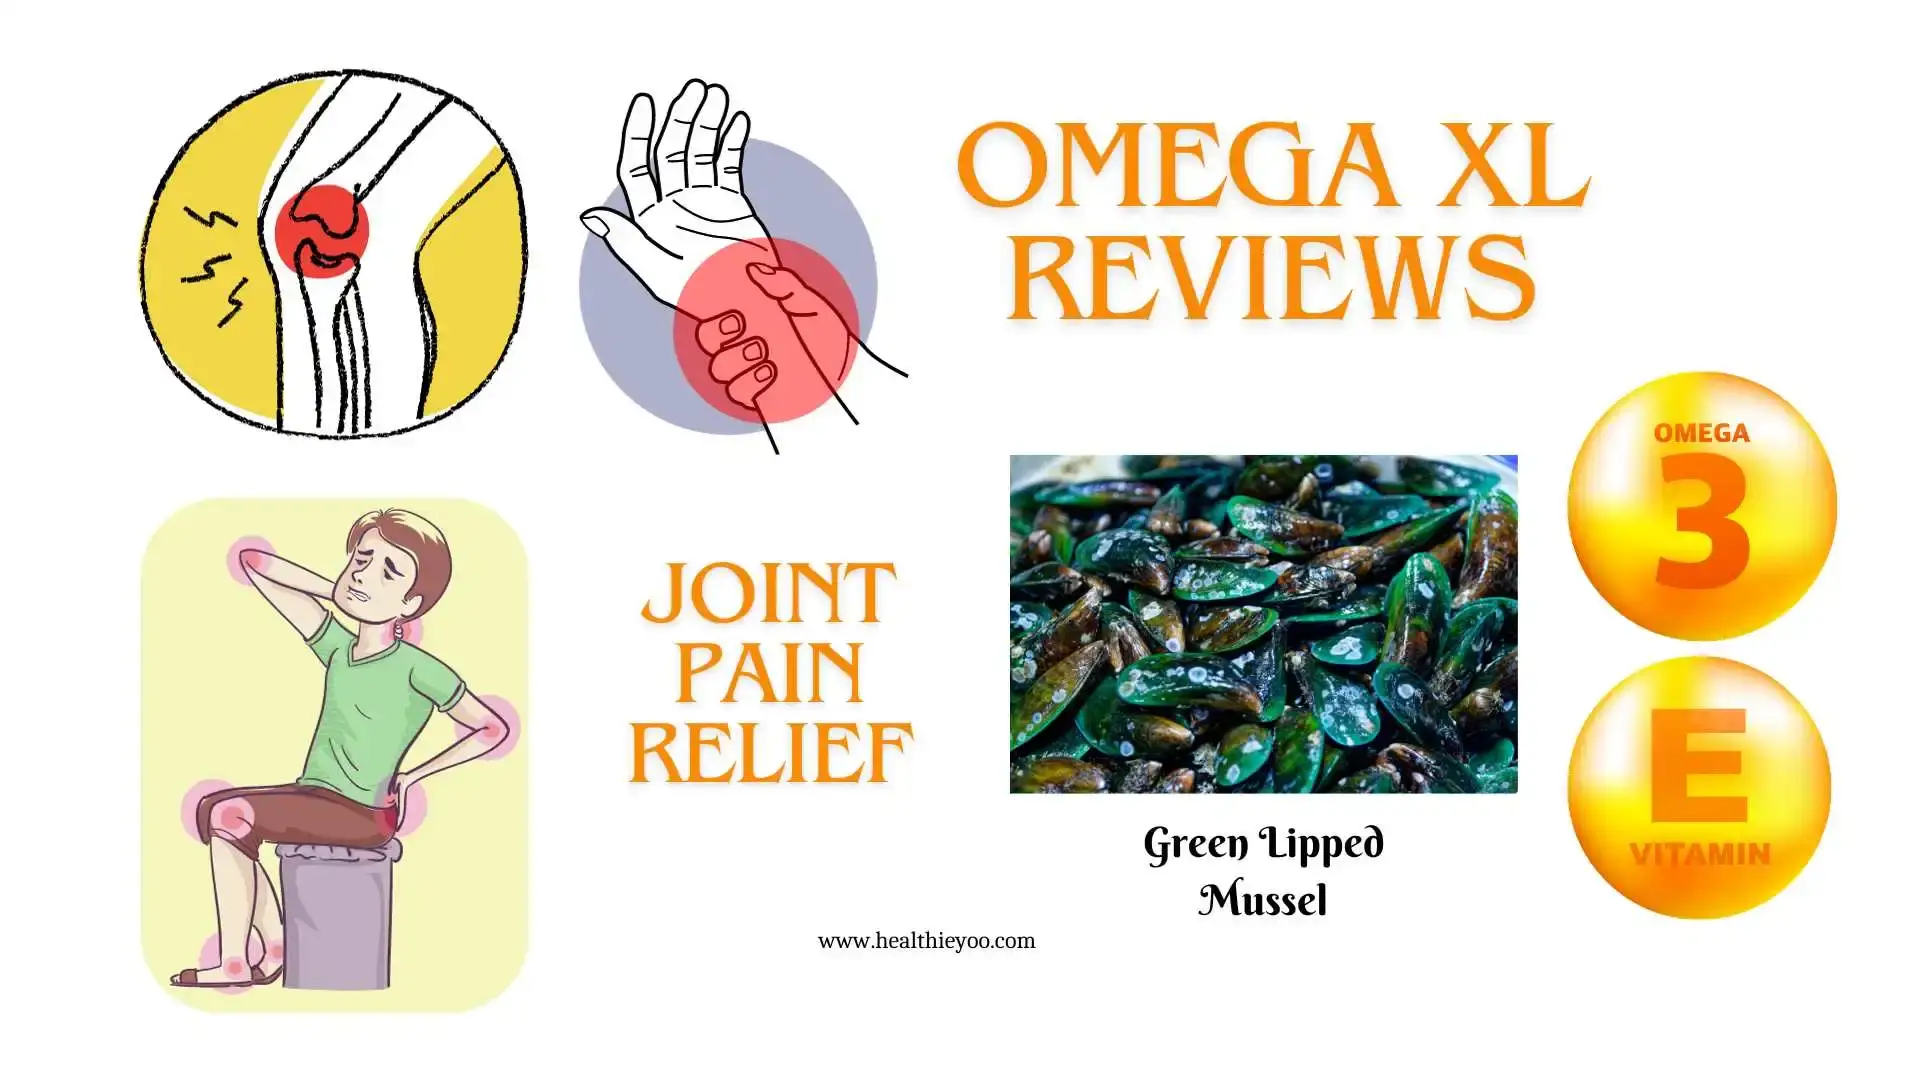 Omega XL reviews, green lipped mussel, joint pain